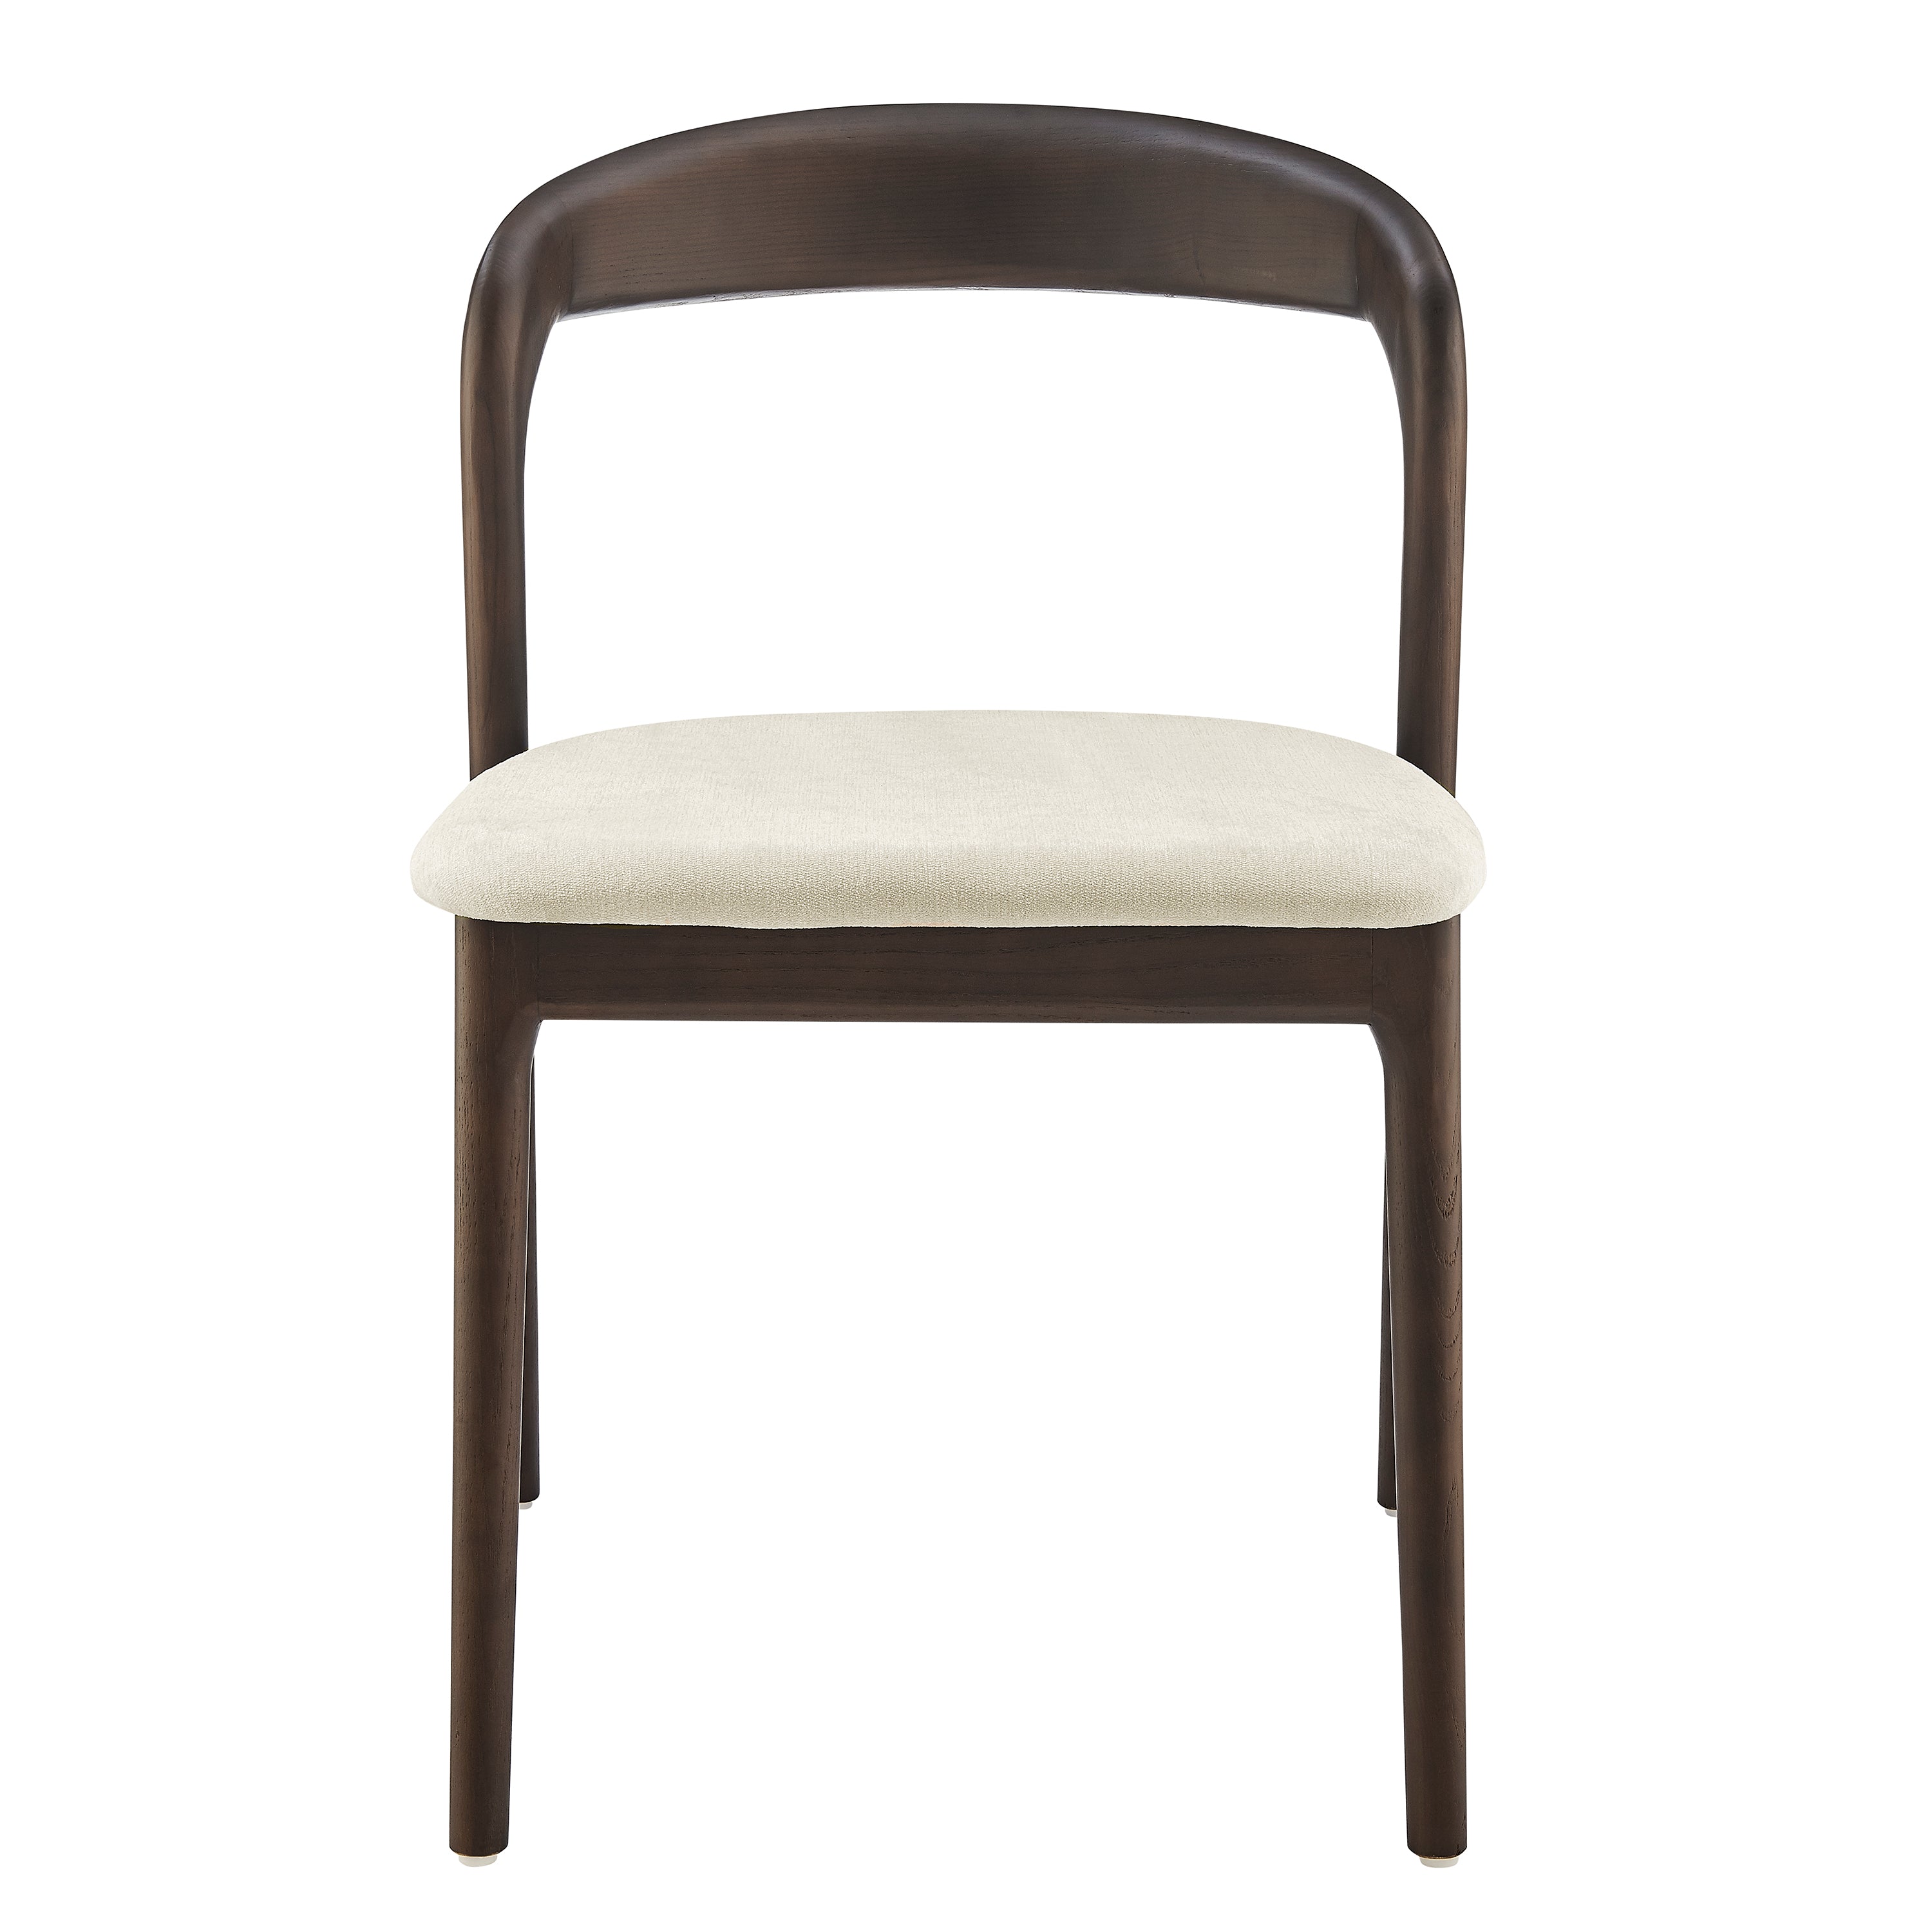 Euro Style Dining Chairs - Estelle Side Chair with Natural Fabric and Dark Walnut Frame - Set of 1